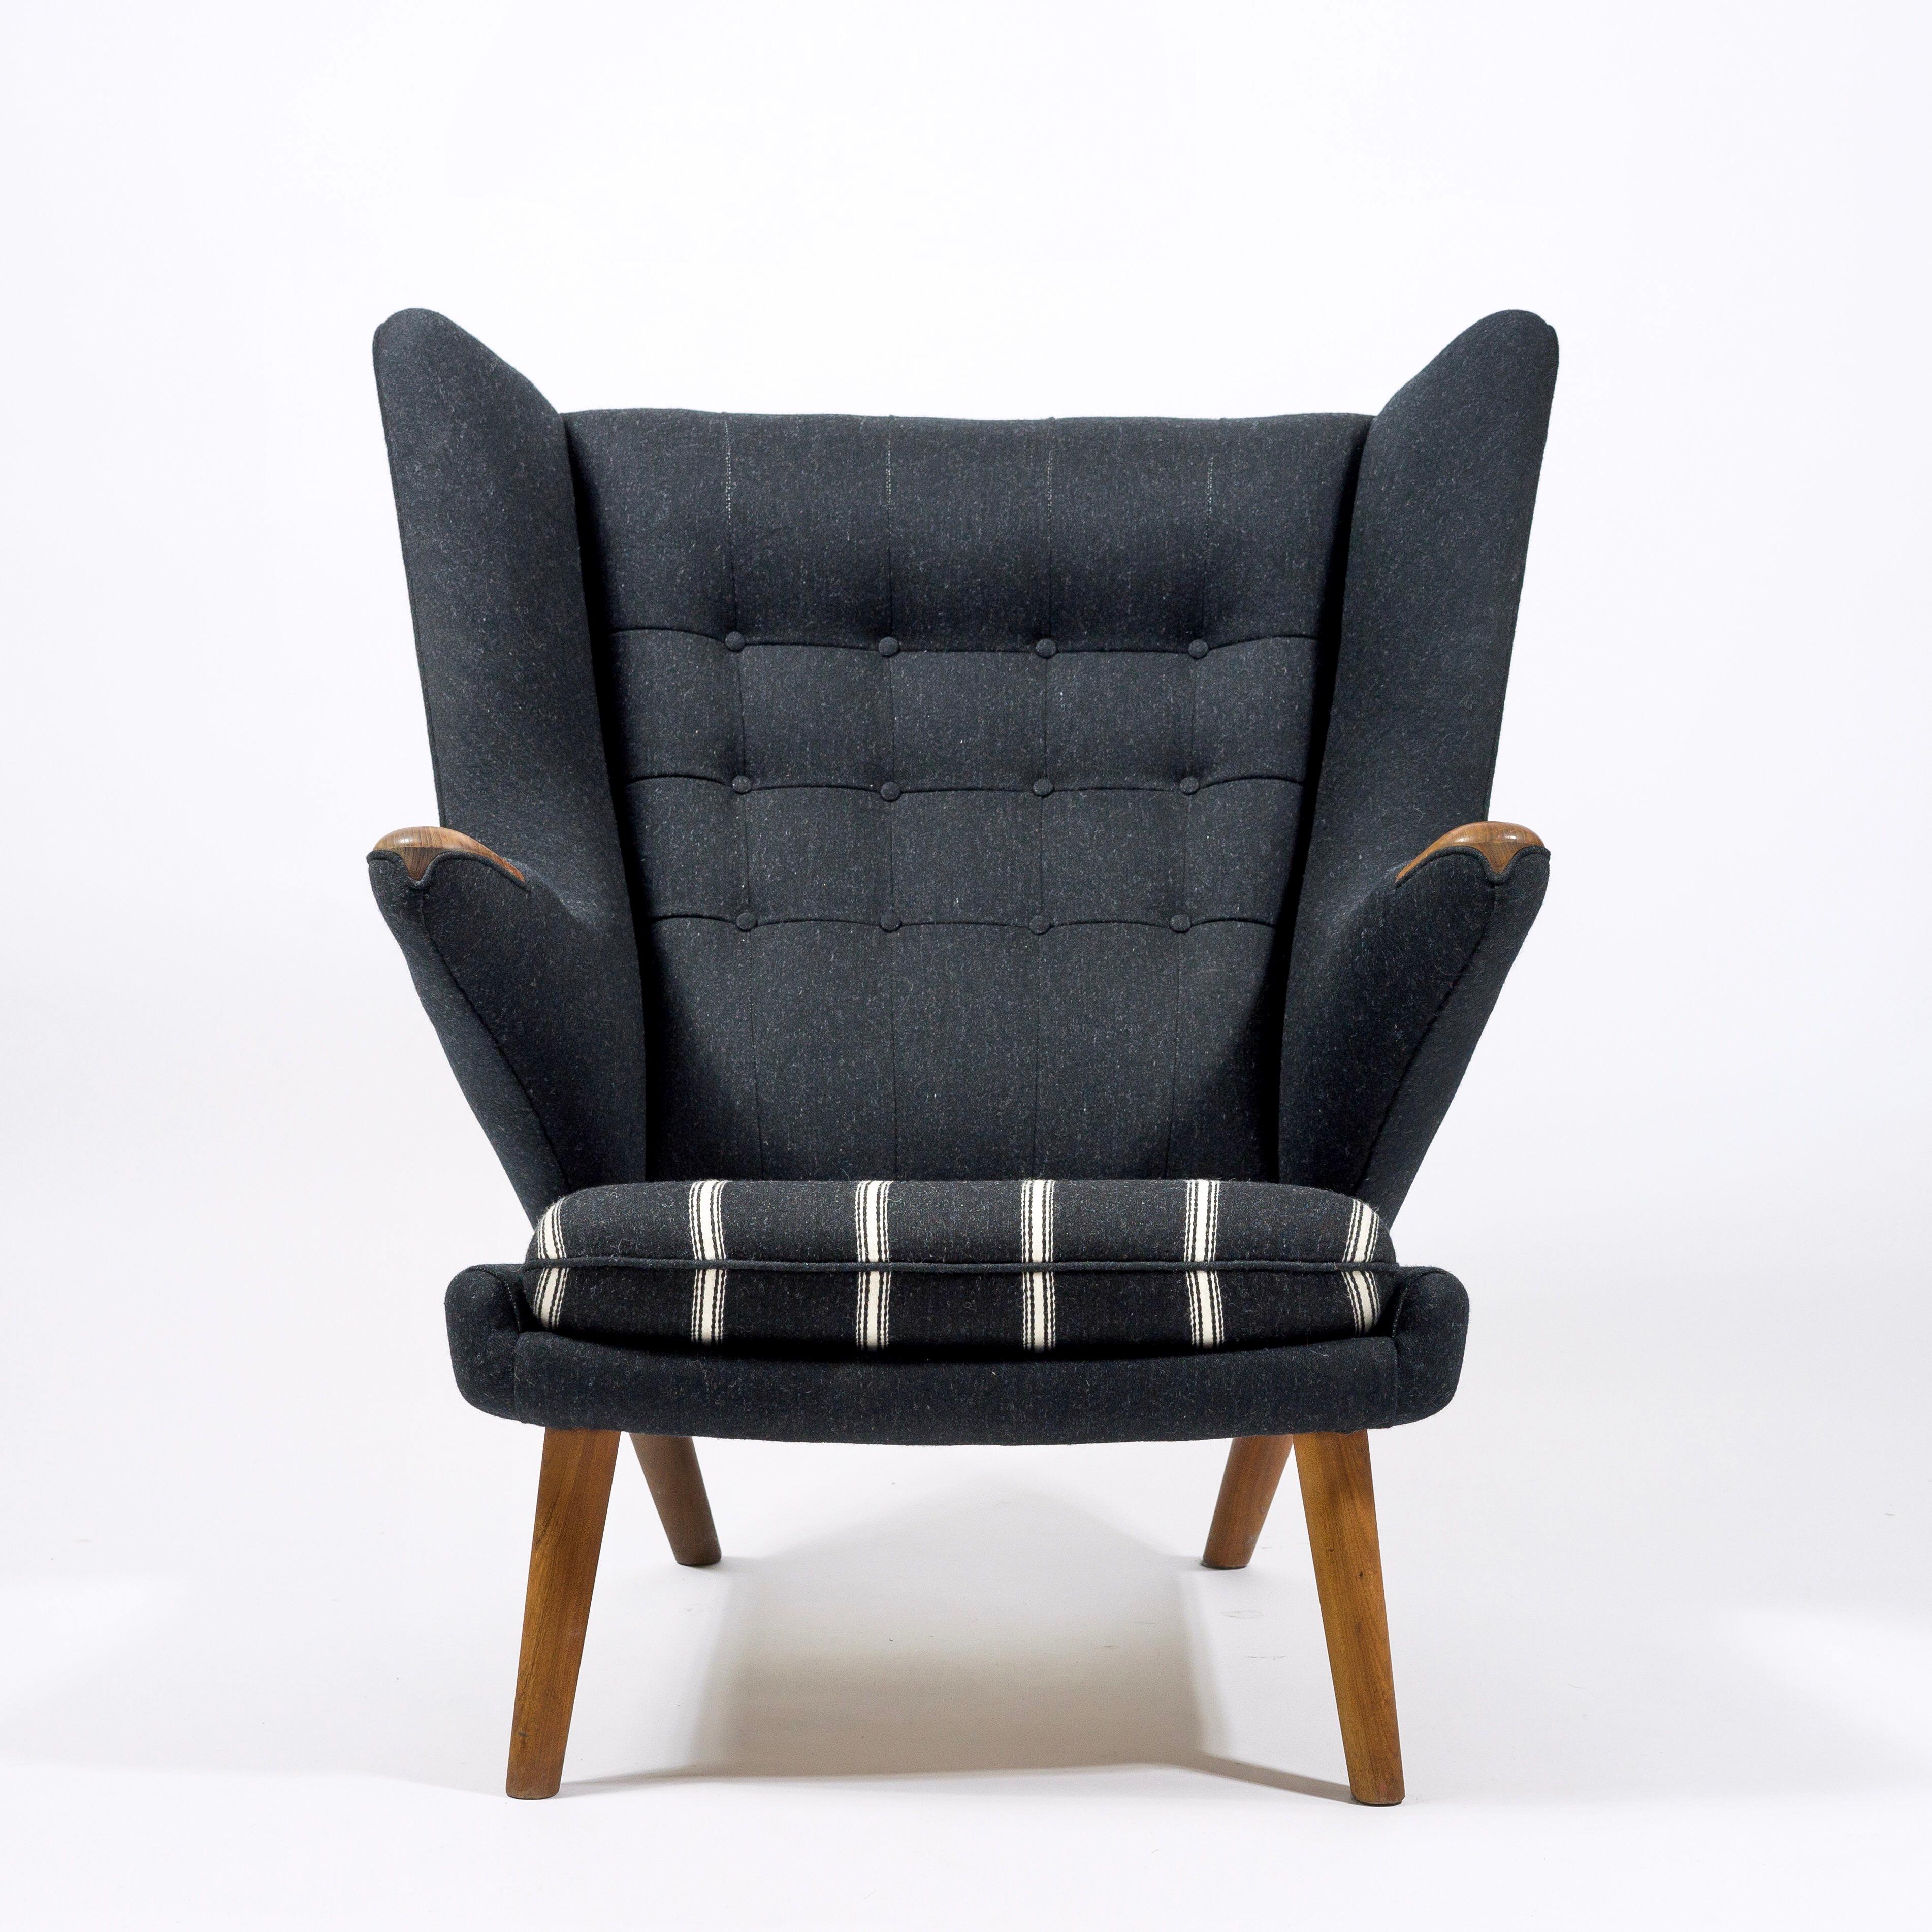 First series of AP 19 lounge chair also called Papa bear chair designed by Hans J. Wegner and manufactured by A.P. Stolen Bamse, Denmark, 1951.
New upholstery.